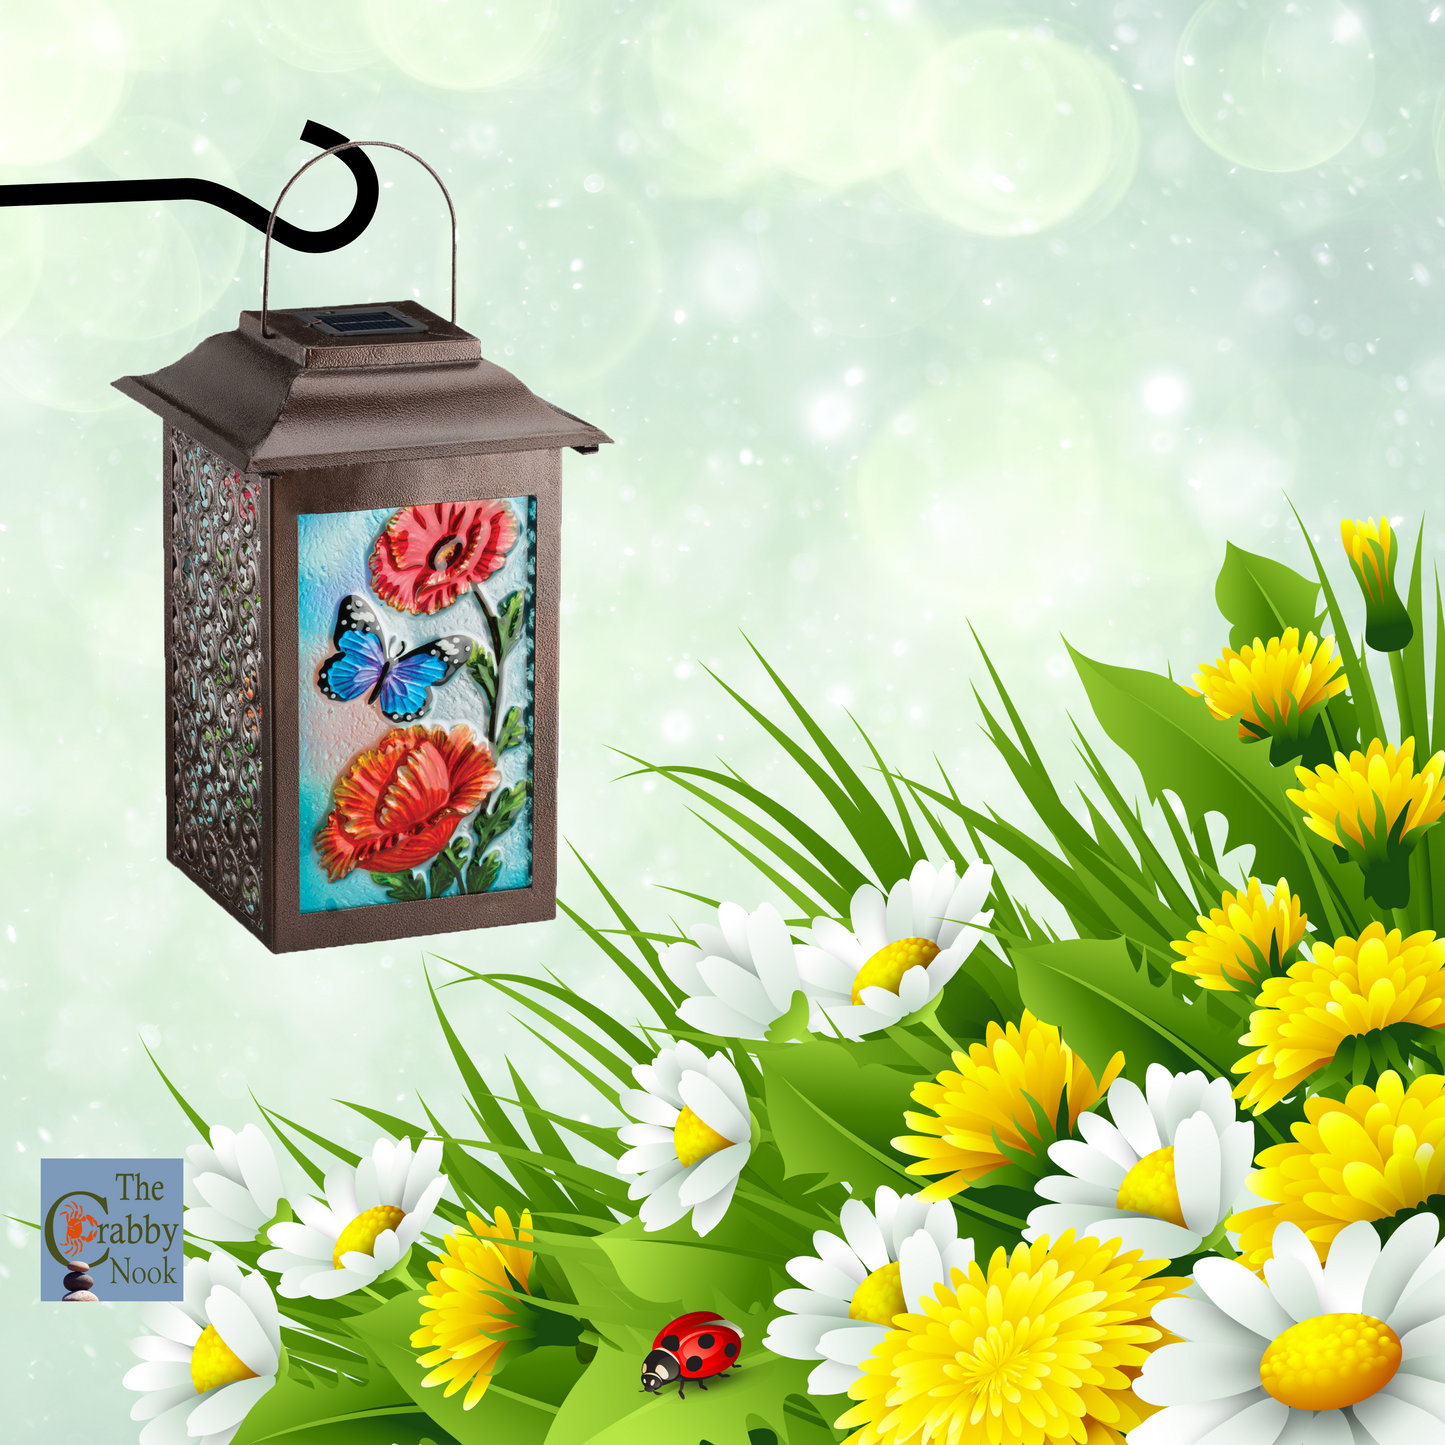 Solar Garden Lantern 16.5" Butterfly Outdoor LED Light Colorful Painted Glass Panels